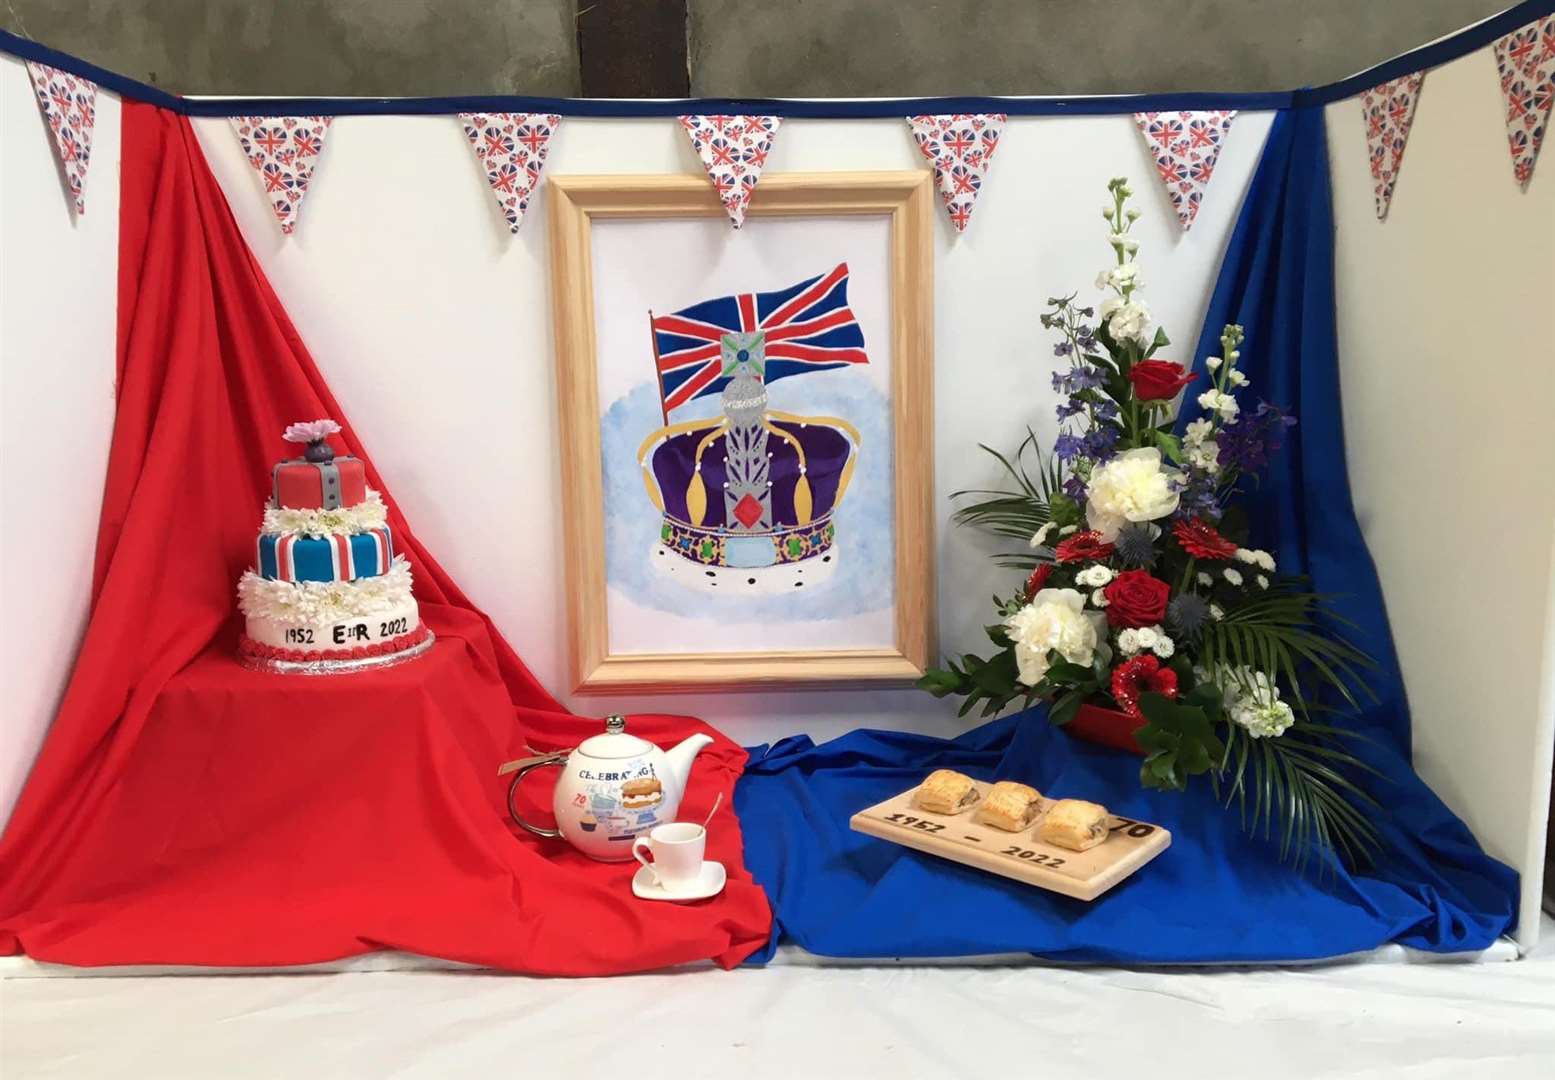 A jubilee theme to Bower's winning club display consisting of sausage rolls, decorated cake, floral arrangement, a mocktail, sewn bunting and a further article, a hand-drawn picture.